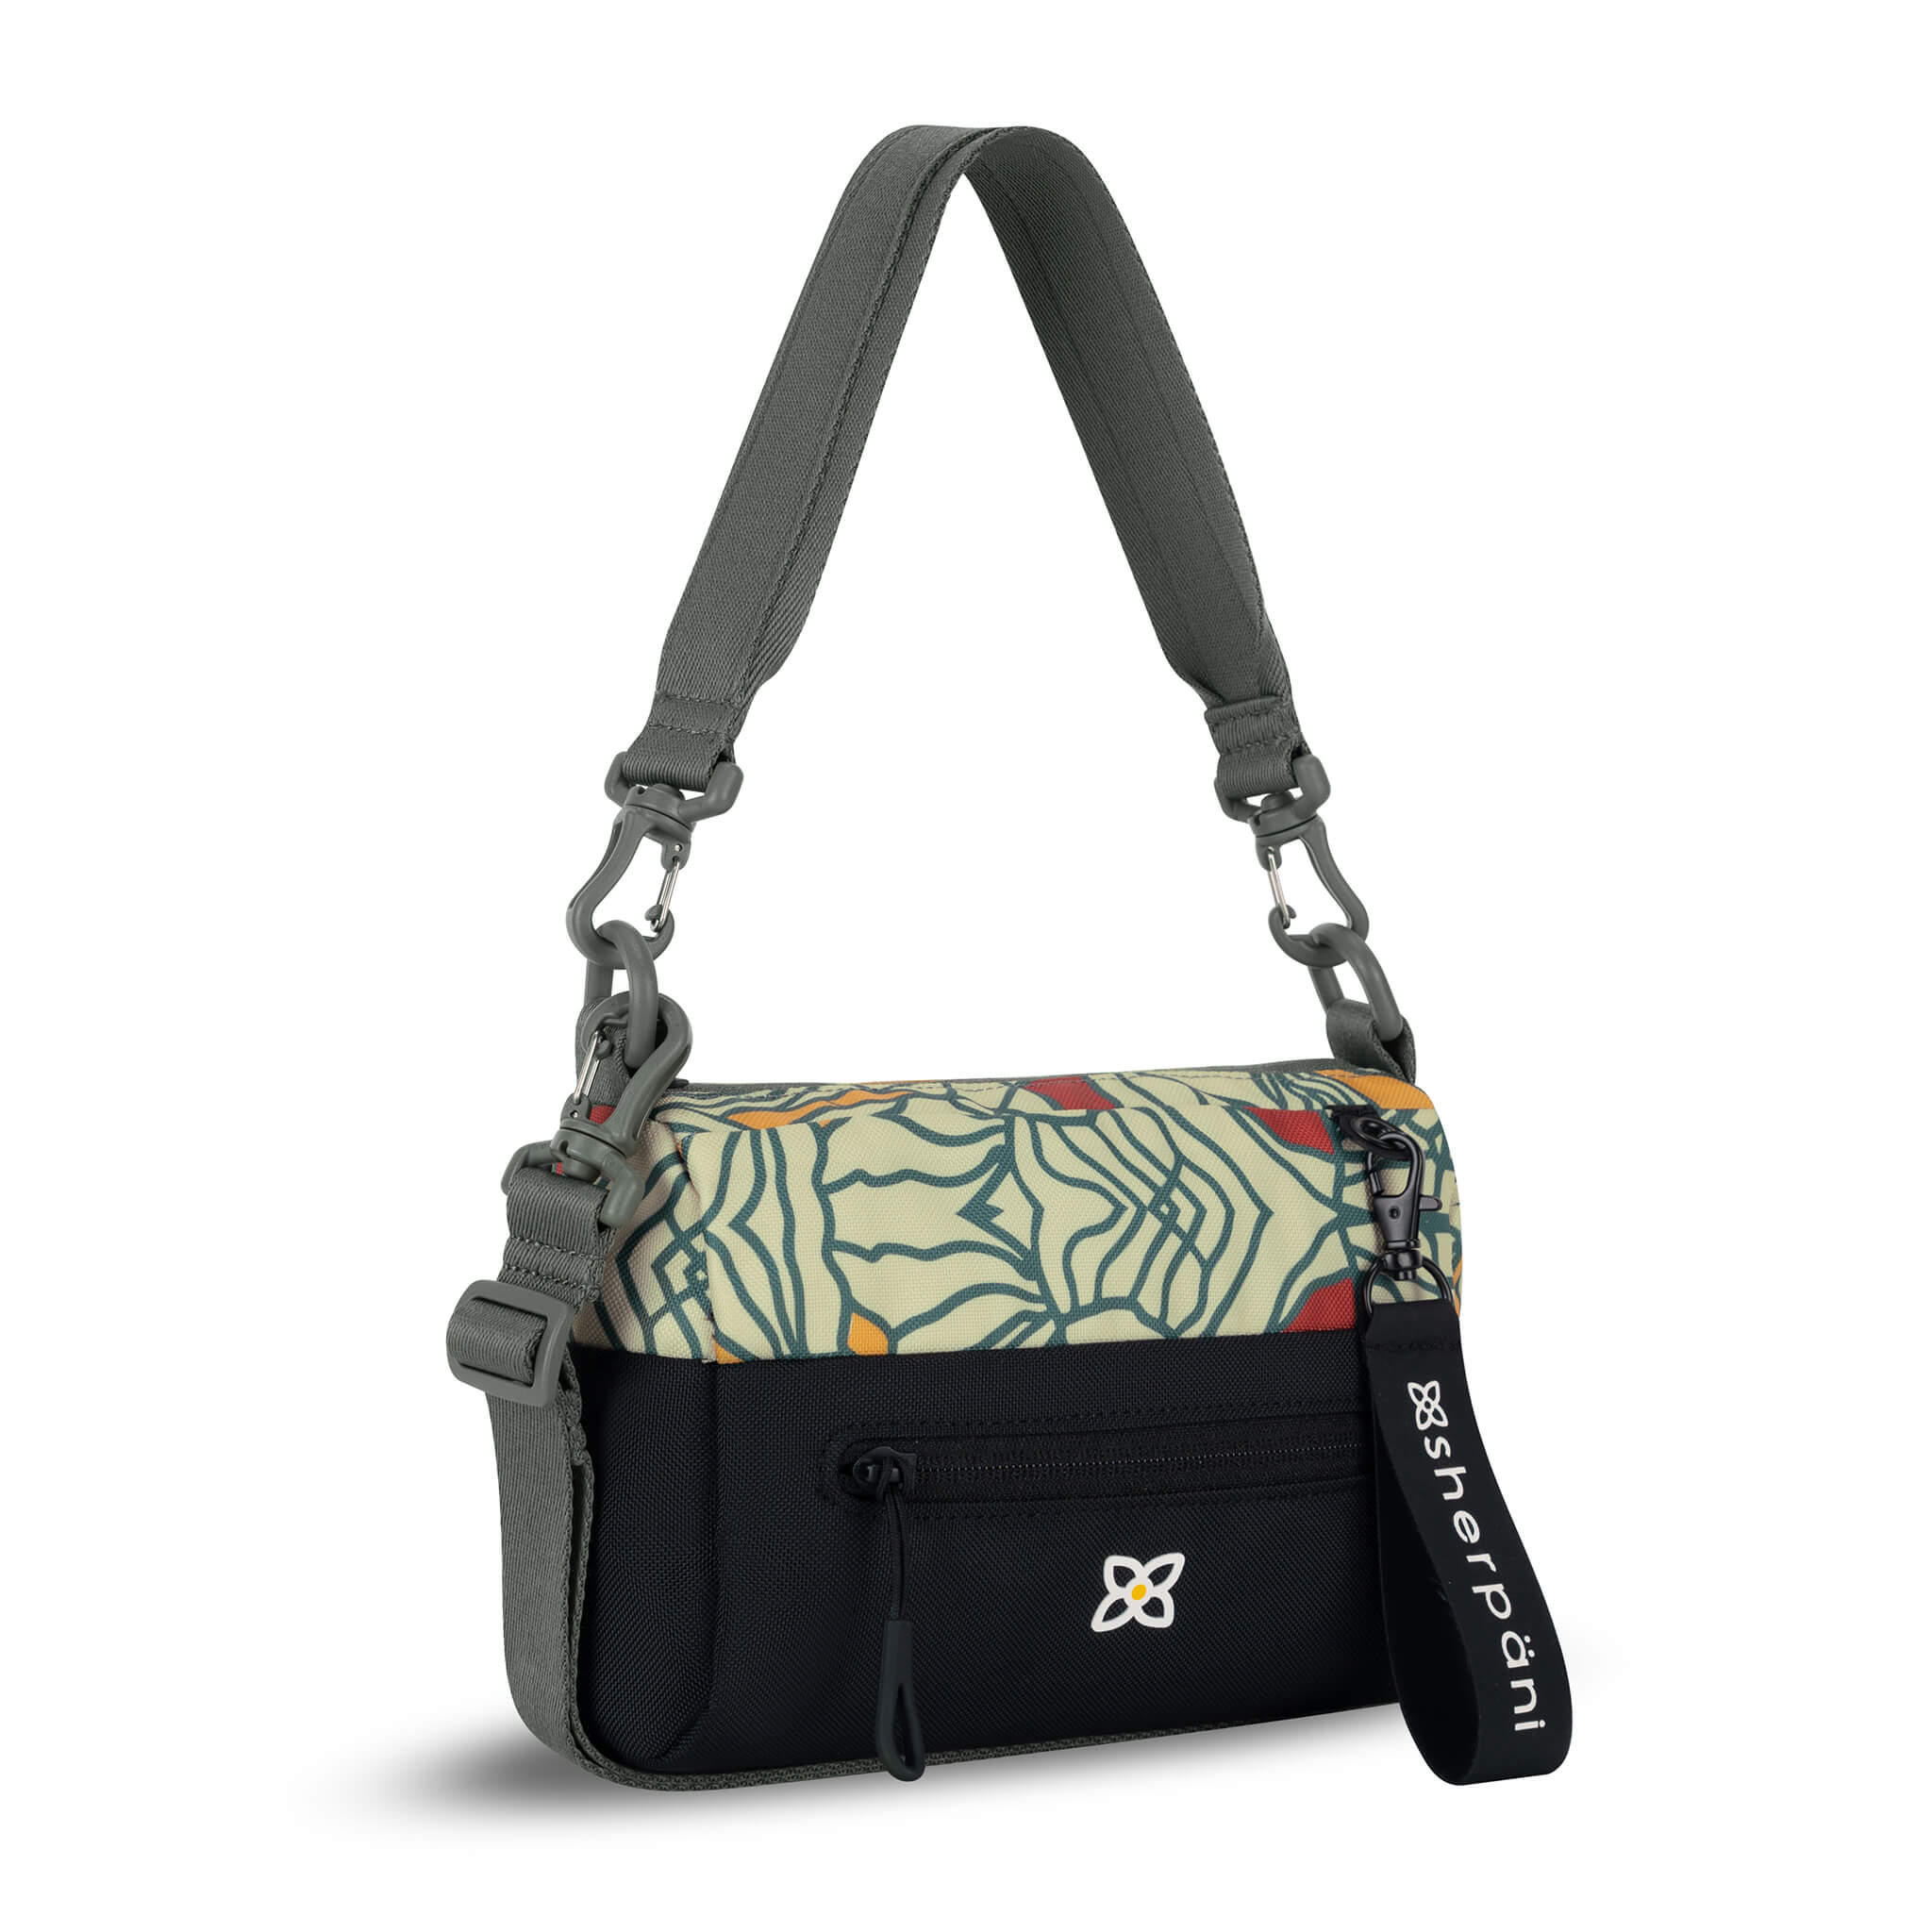 Angled front view of Sherpani mini shoulder bag, the Skye in Fiori. Skye features include RFID security, detachable keychain, outside zipper pocket, two inside zipper pockets and two removable straps: a short shoulder strap and a longer adjustable crossbody strap. The Fiori colorway is two-toned in black and a floral pattern with a neutral color palette. #color_fiori